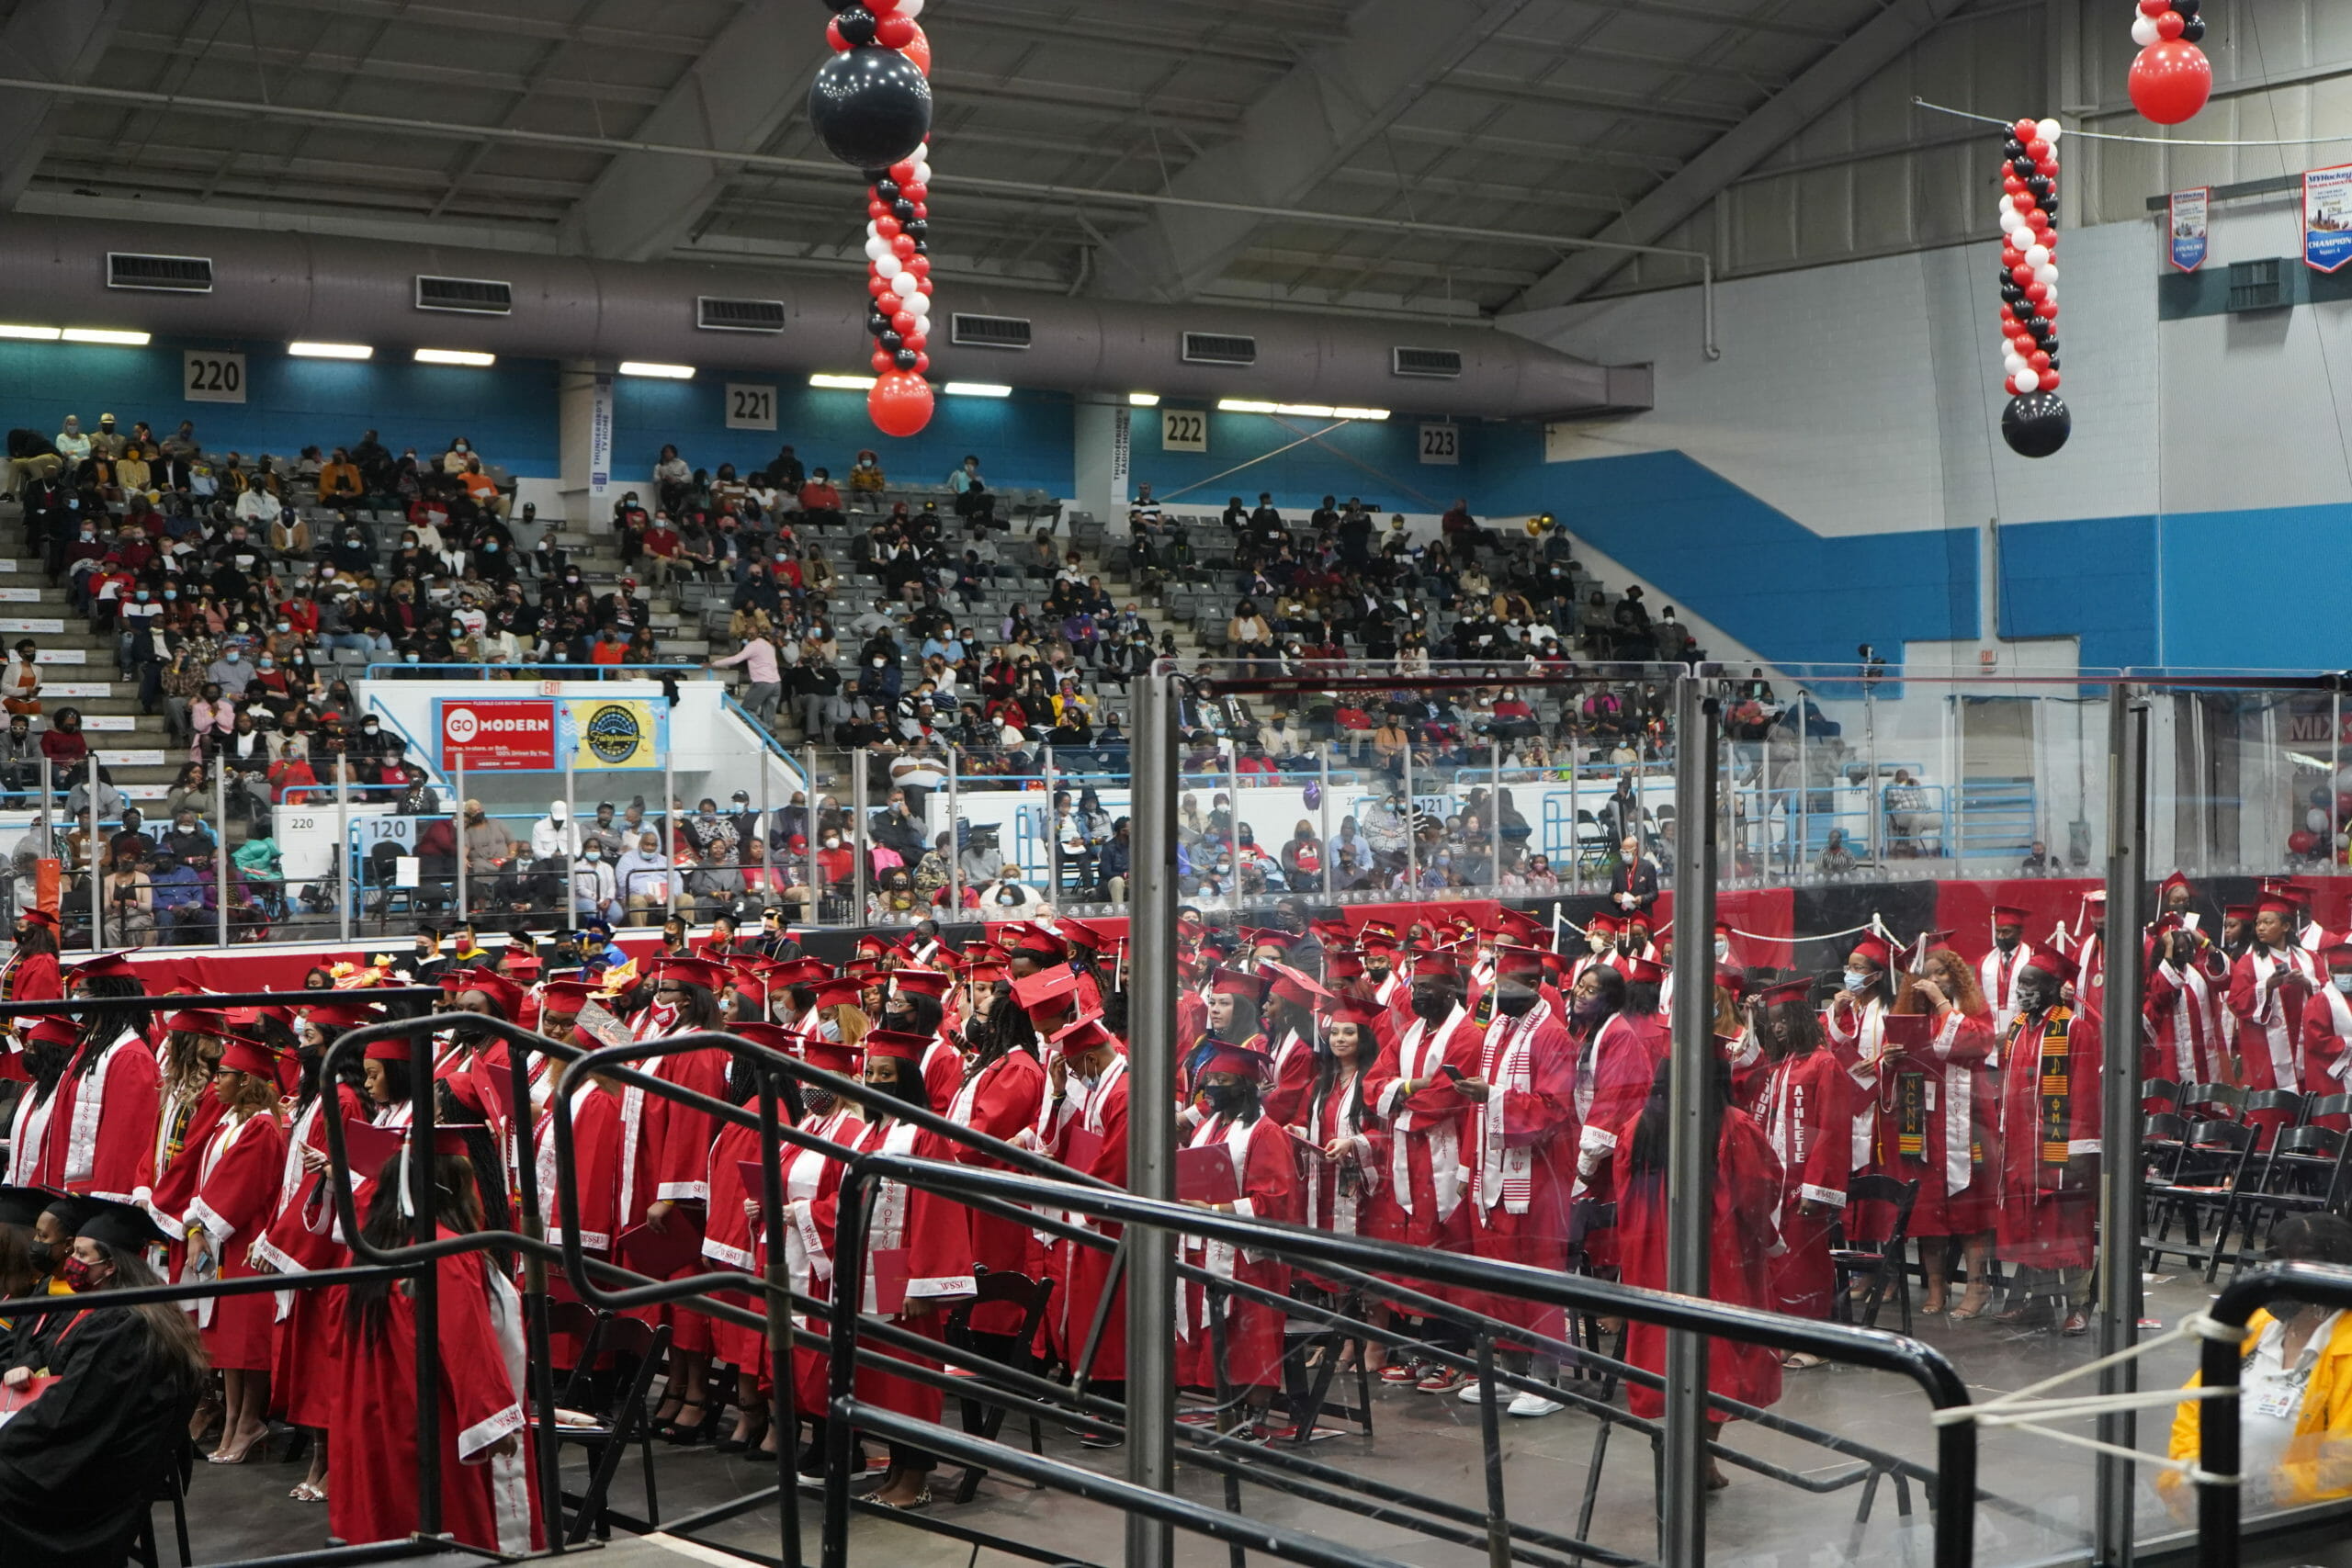 2021 Winston-Salem State University Winter Commencement at the Annex